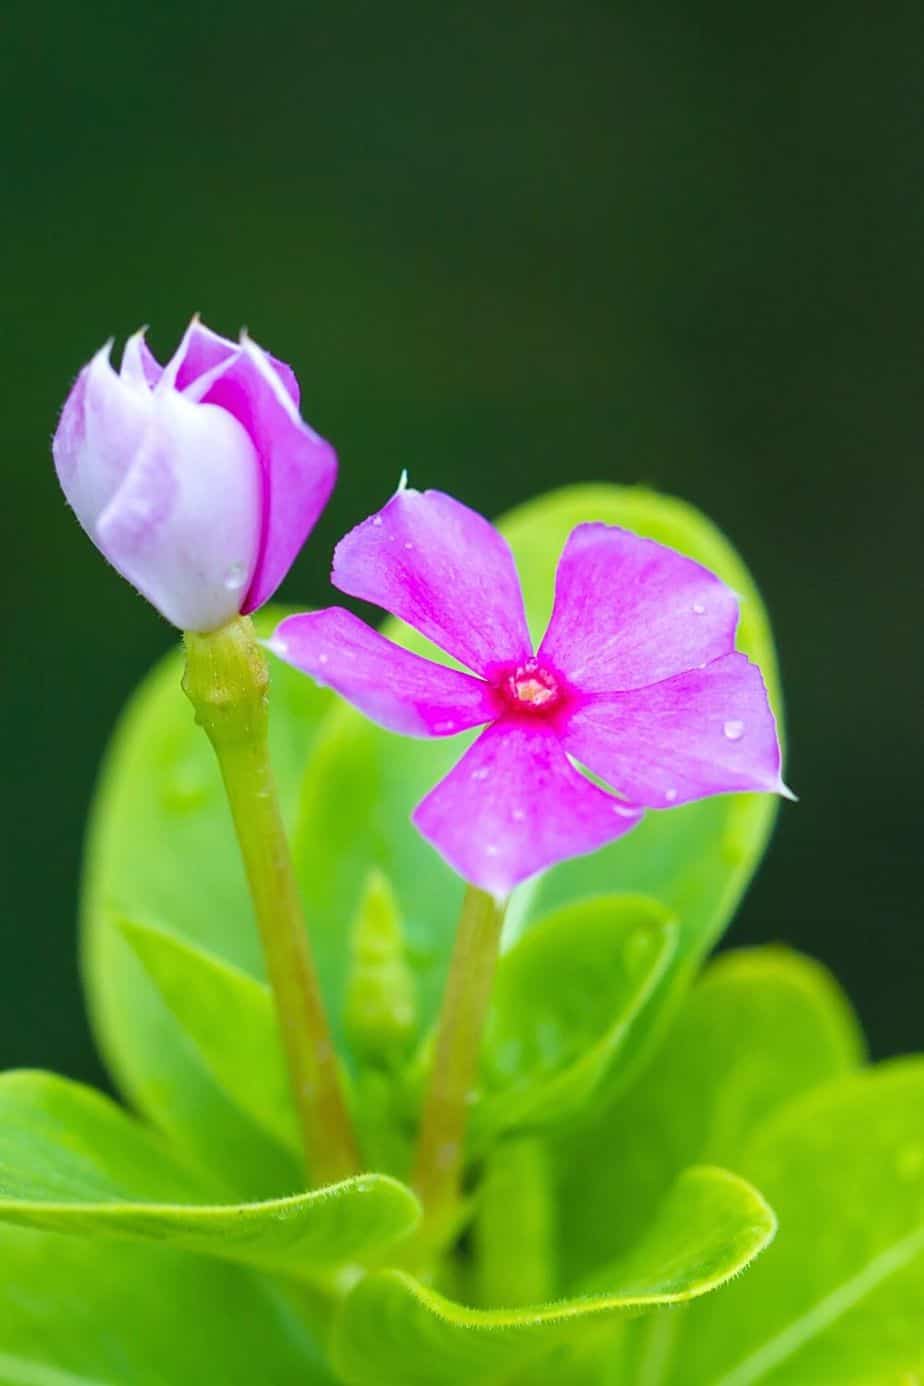 Vinca, aka Periwinkle, is a low-maintenance plant that you can grow in your west-facing balcony